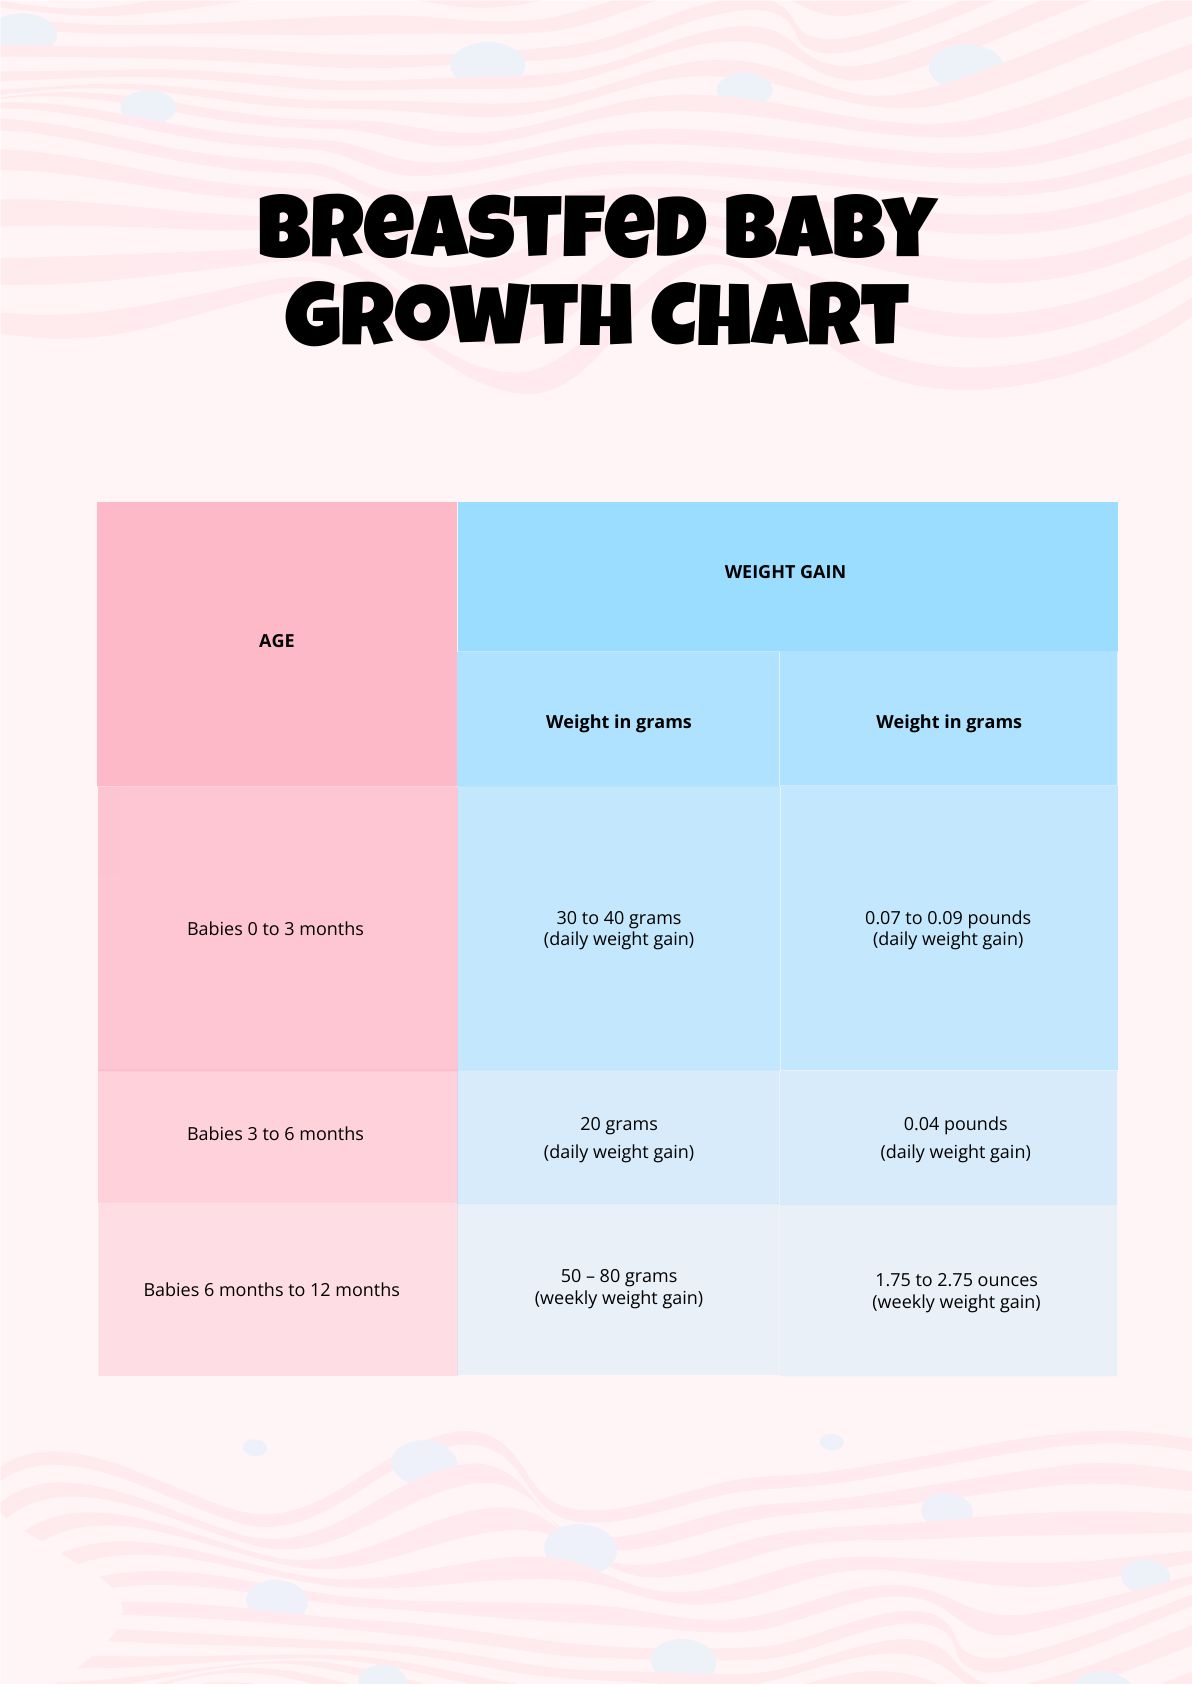 Breastfed Baby Growth Chart